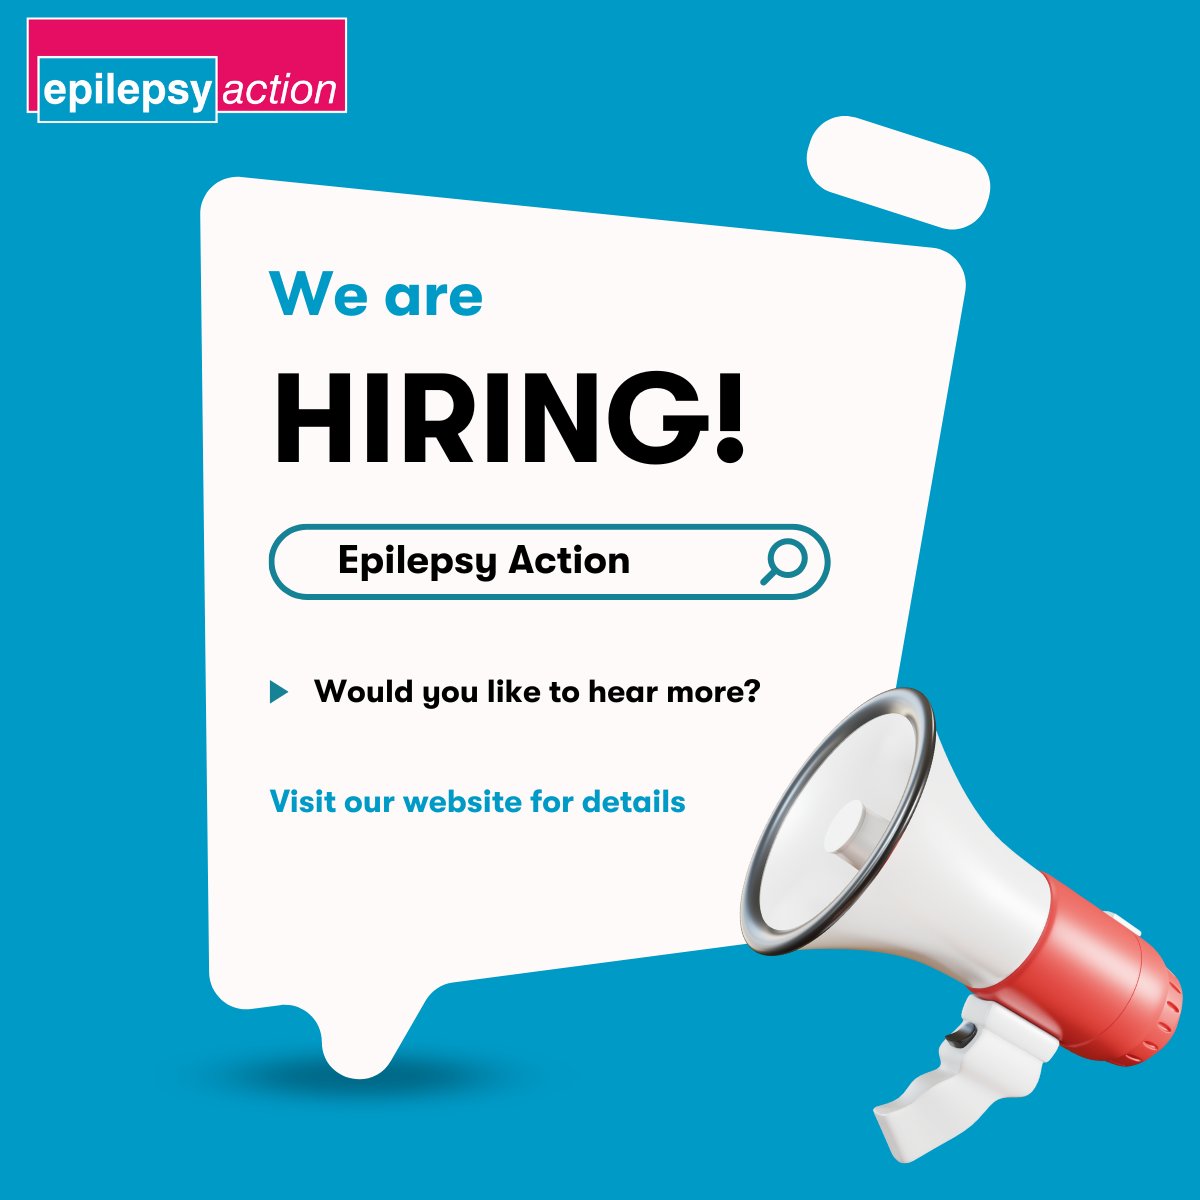 We are hiring! Join our team and help us to create a world without limits for people with epilepsy. The roles on offer include: •Group Support Officer •Volunteer Support Officer (Befriending) •Marketing and Brand Manager Find out more here: epilepsy.org.uk/about/vacancies